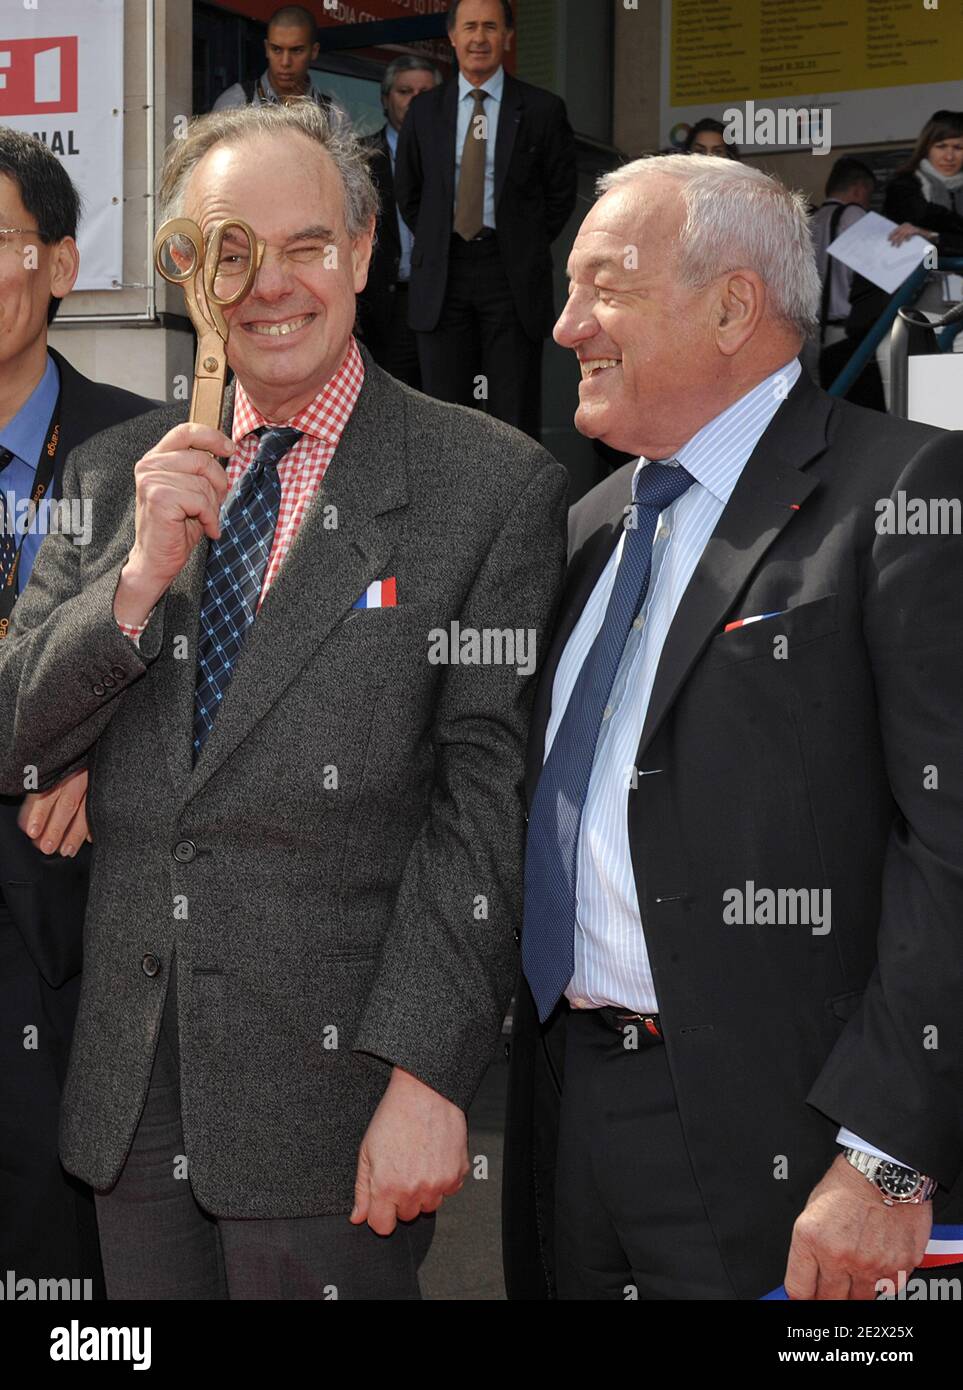 French culture minister Frederic Mitterrand and Cannes Mayor Bernard Brochand attending the opening of the MIPTV 2010 in Cannes, France on April 12, 2010. Photo by Giancarlo Gorassini/ABACAPRESS.COM Stock Photo